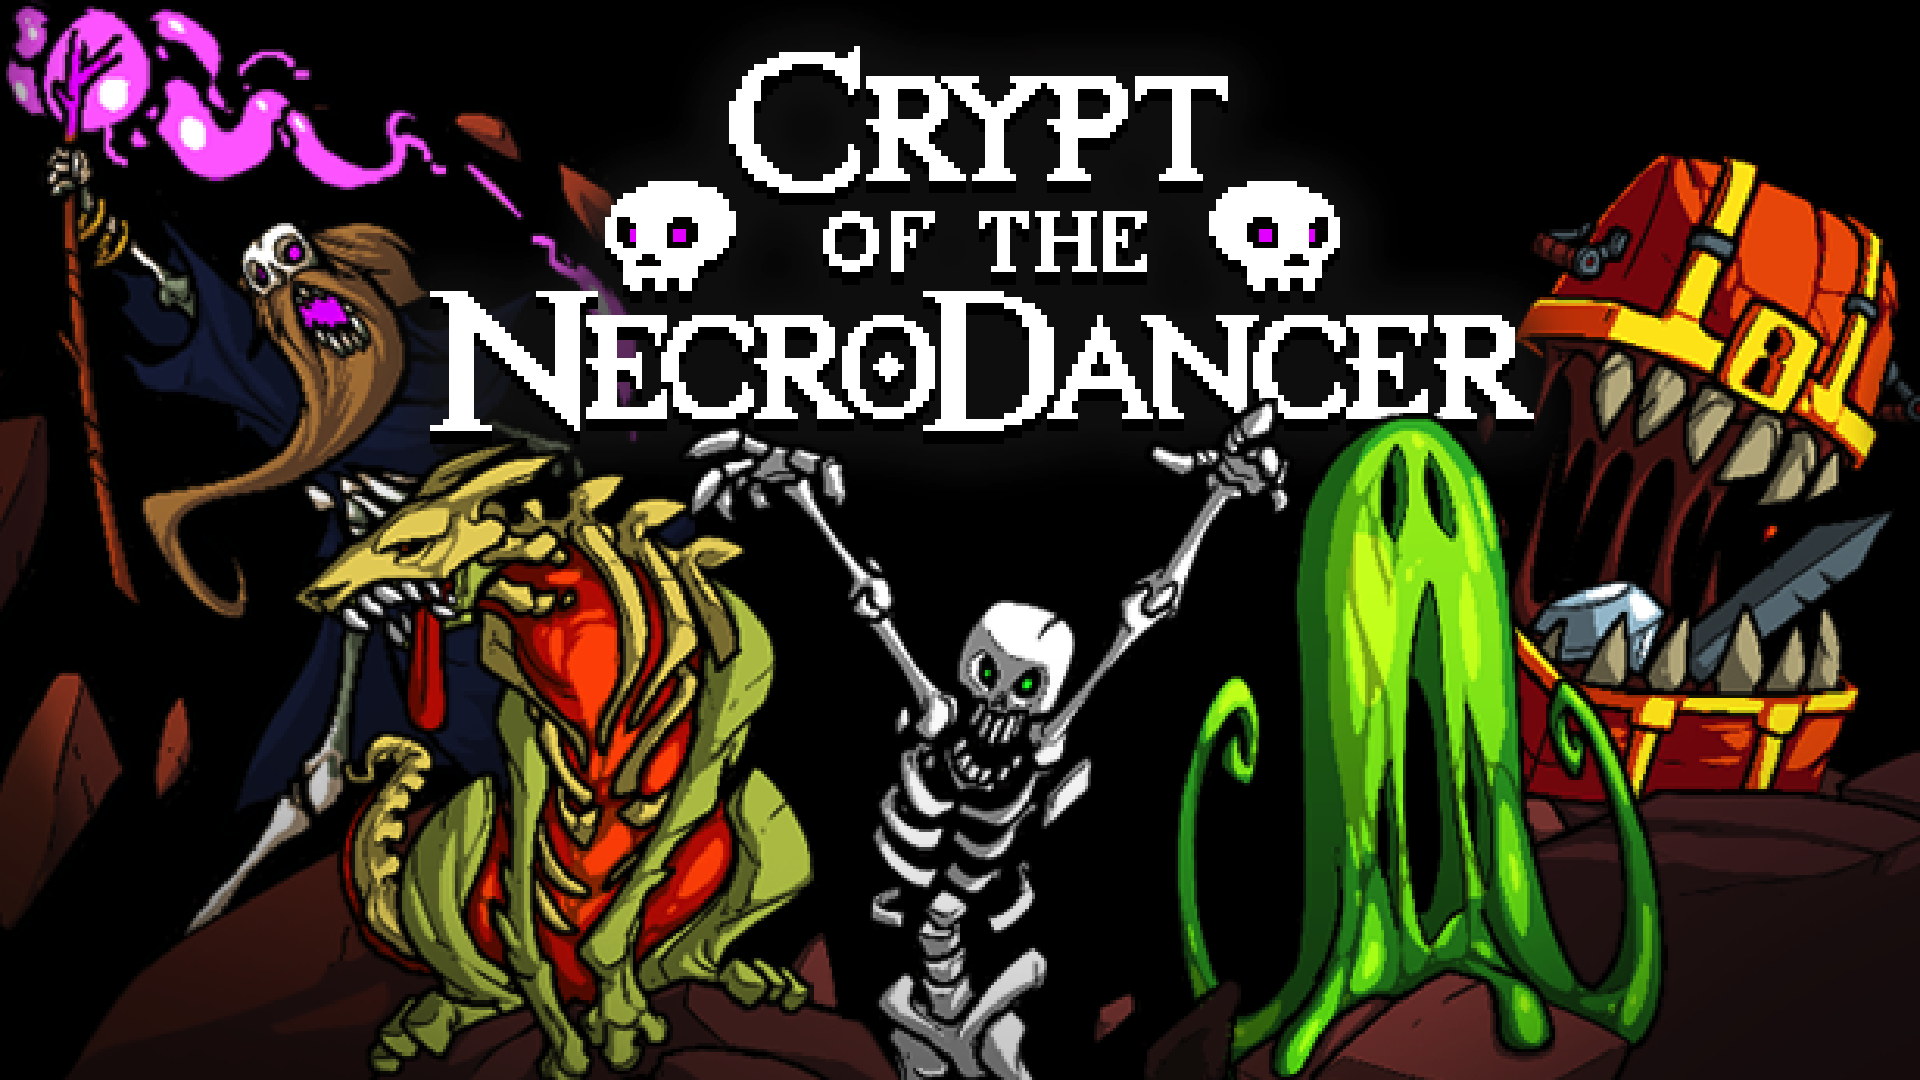 Crypt Of The Necrodancer Wallpapers